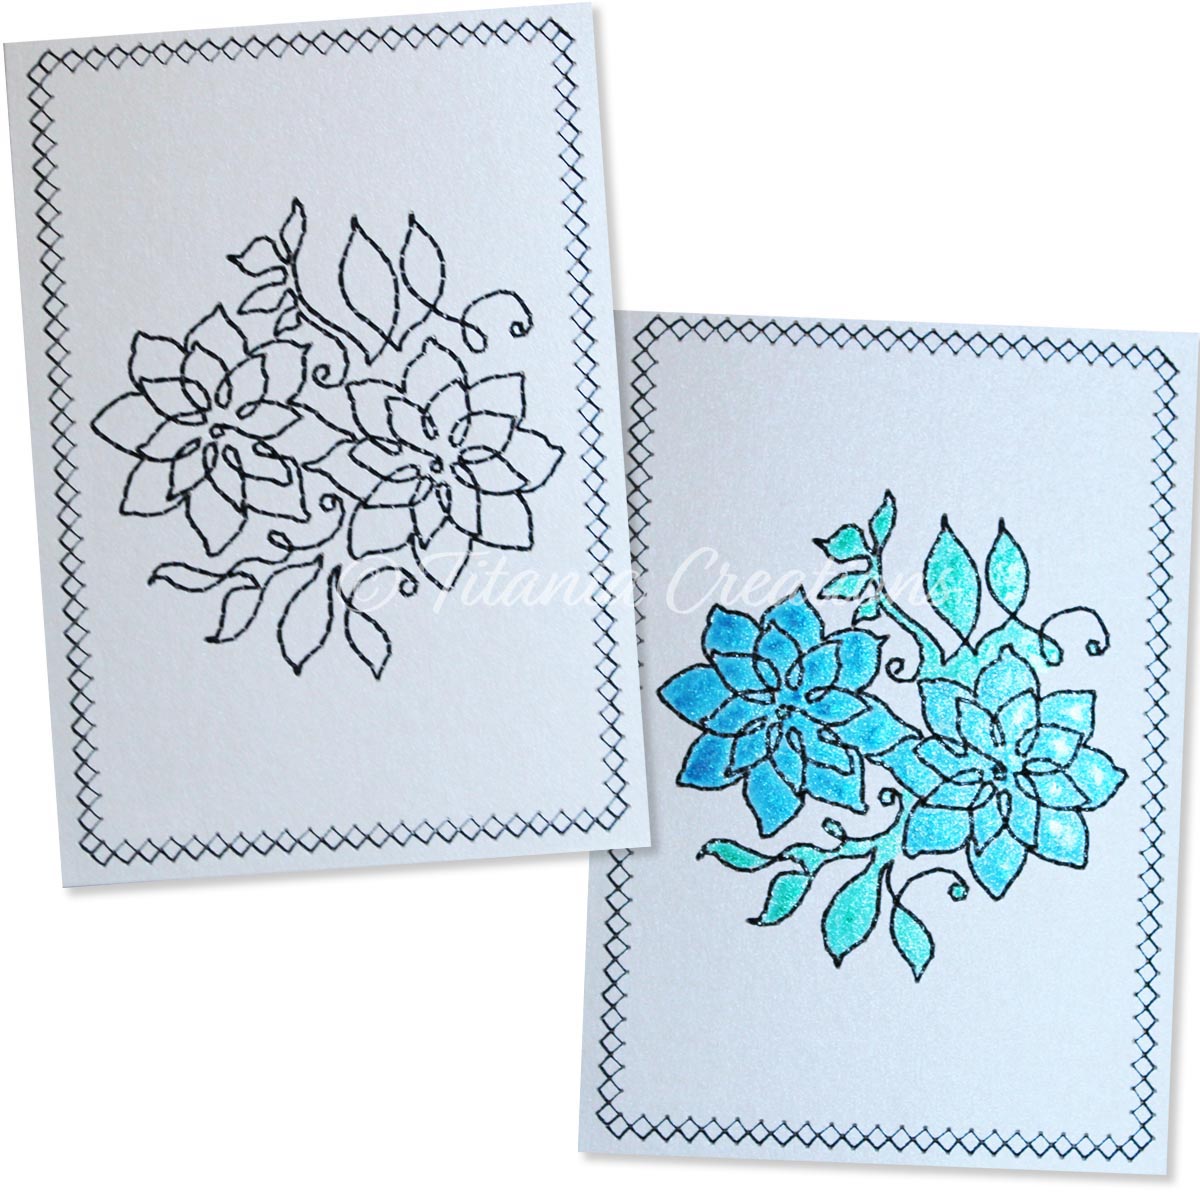 Simply Floral 09 Card Stock Design 5x7